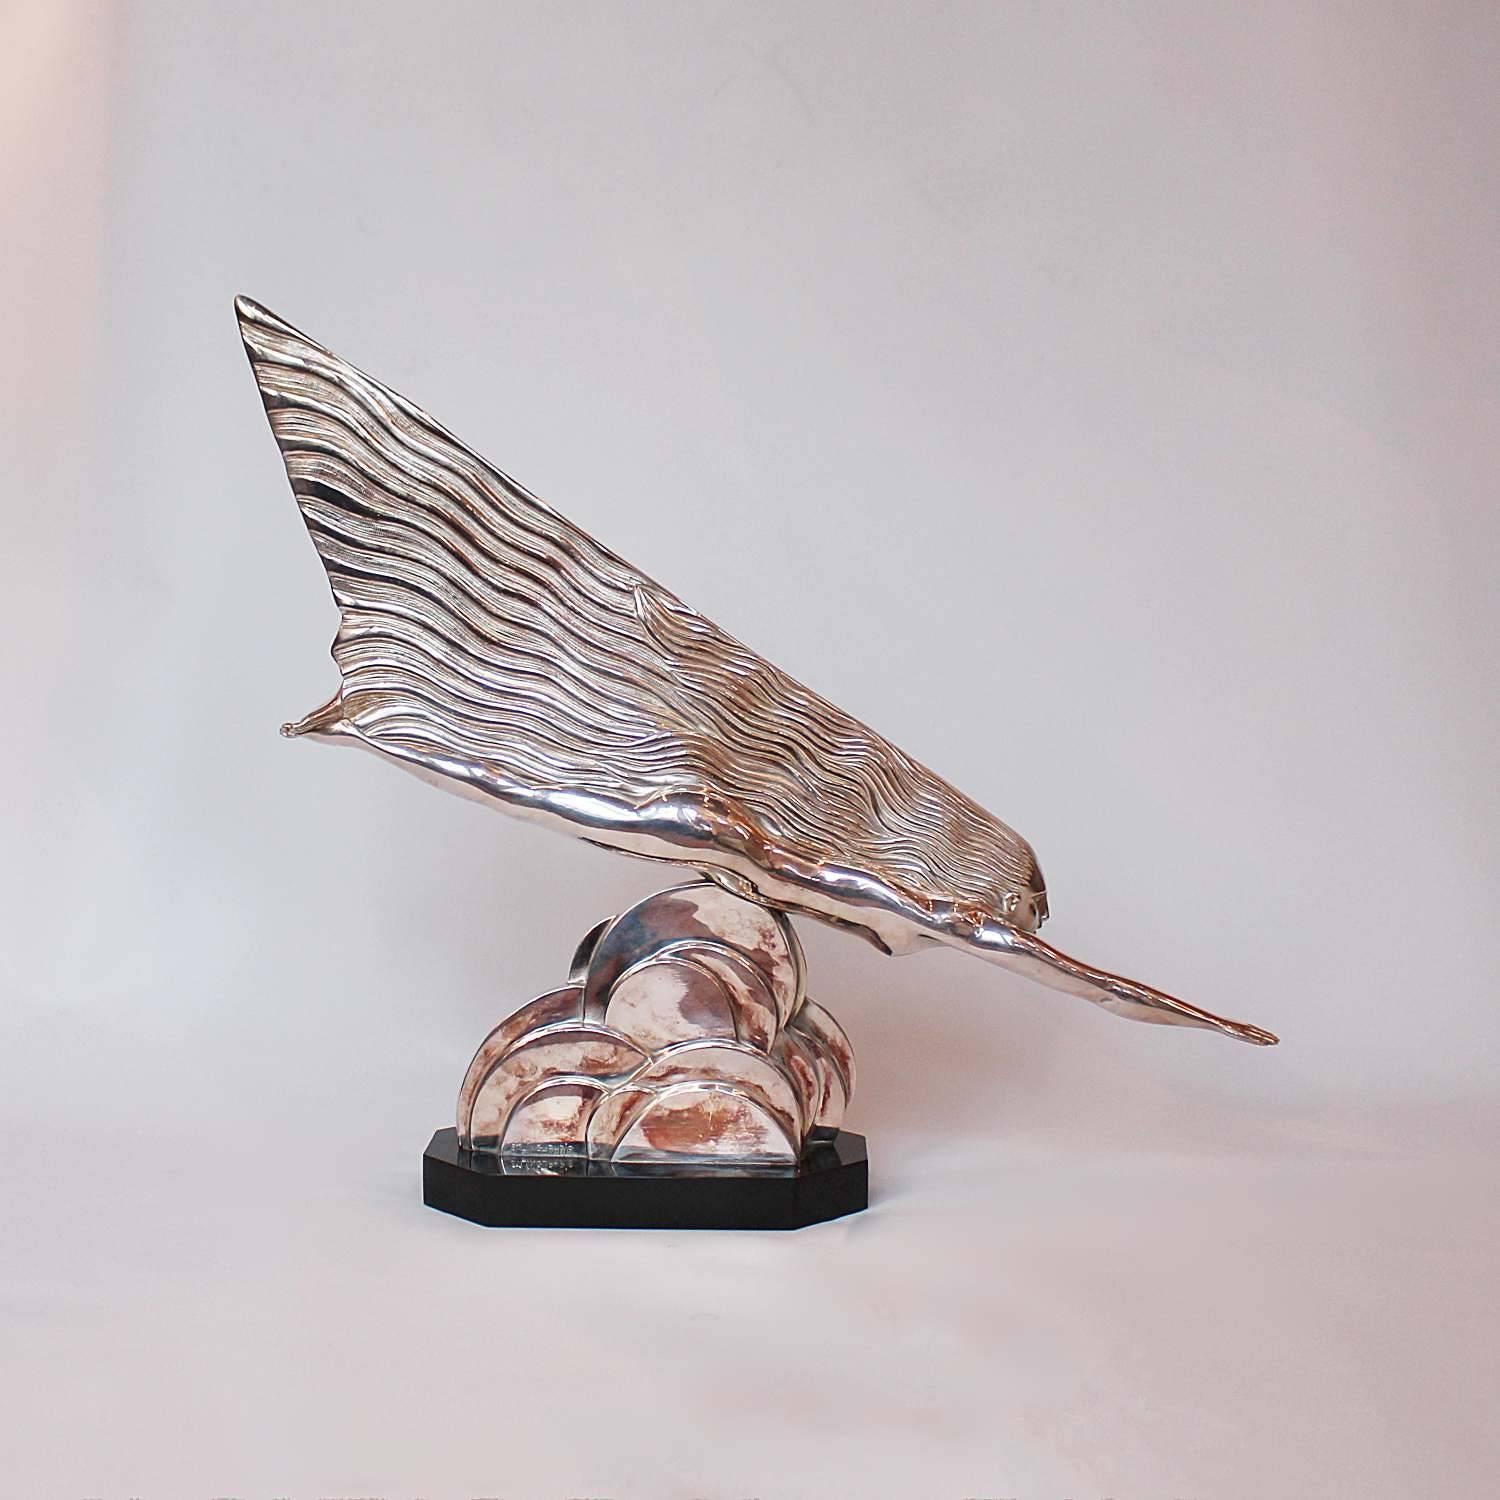 The Comet (La Cométe), an Art Deco, silvered bronze sculpture of a stylized goddess soaring through the clouds in iconically Deco streamline shape. Inspired by the concept of speed, so dominant an influence of the period.

Literature: Brian